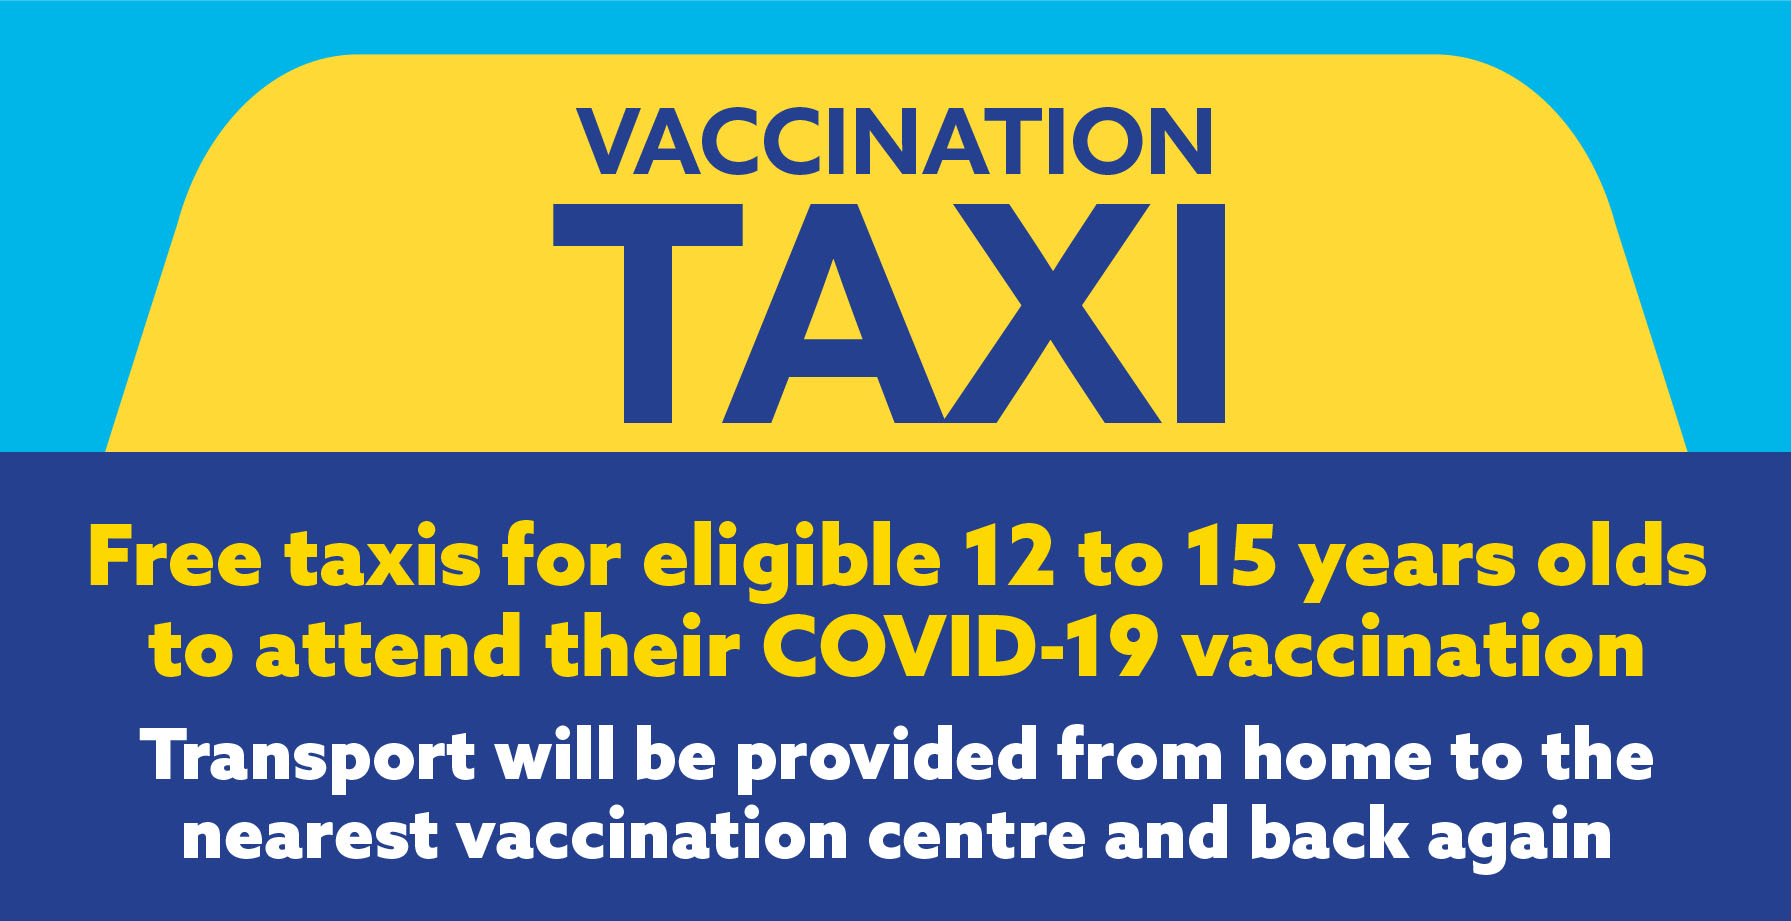 Vaccination Taxi